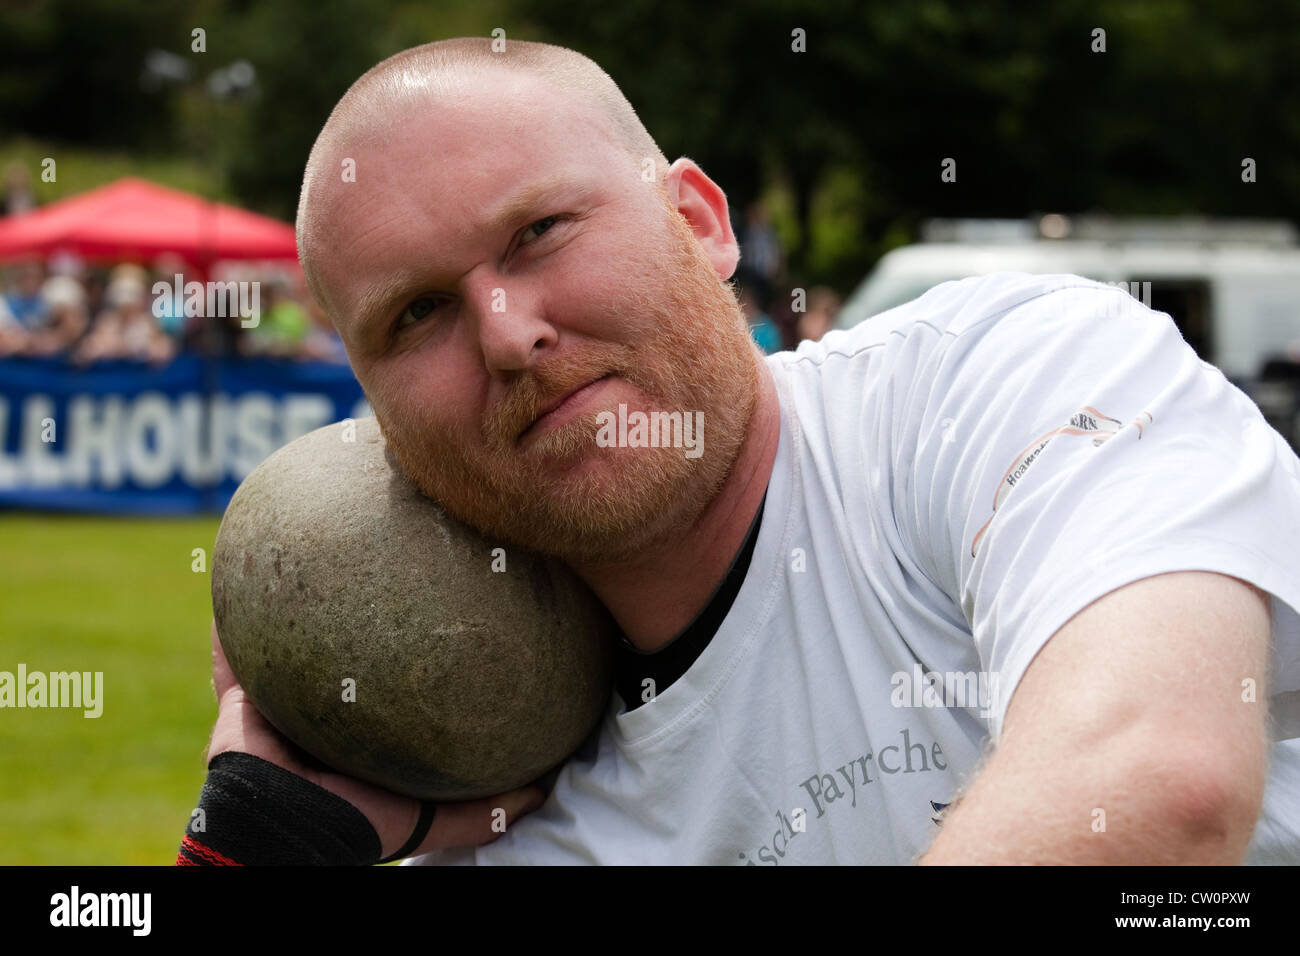 John Neill competing in Highland Games and throwing the stone at Dundonald Highland Games, Ayrshire, Scotland, UK Stock Photo